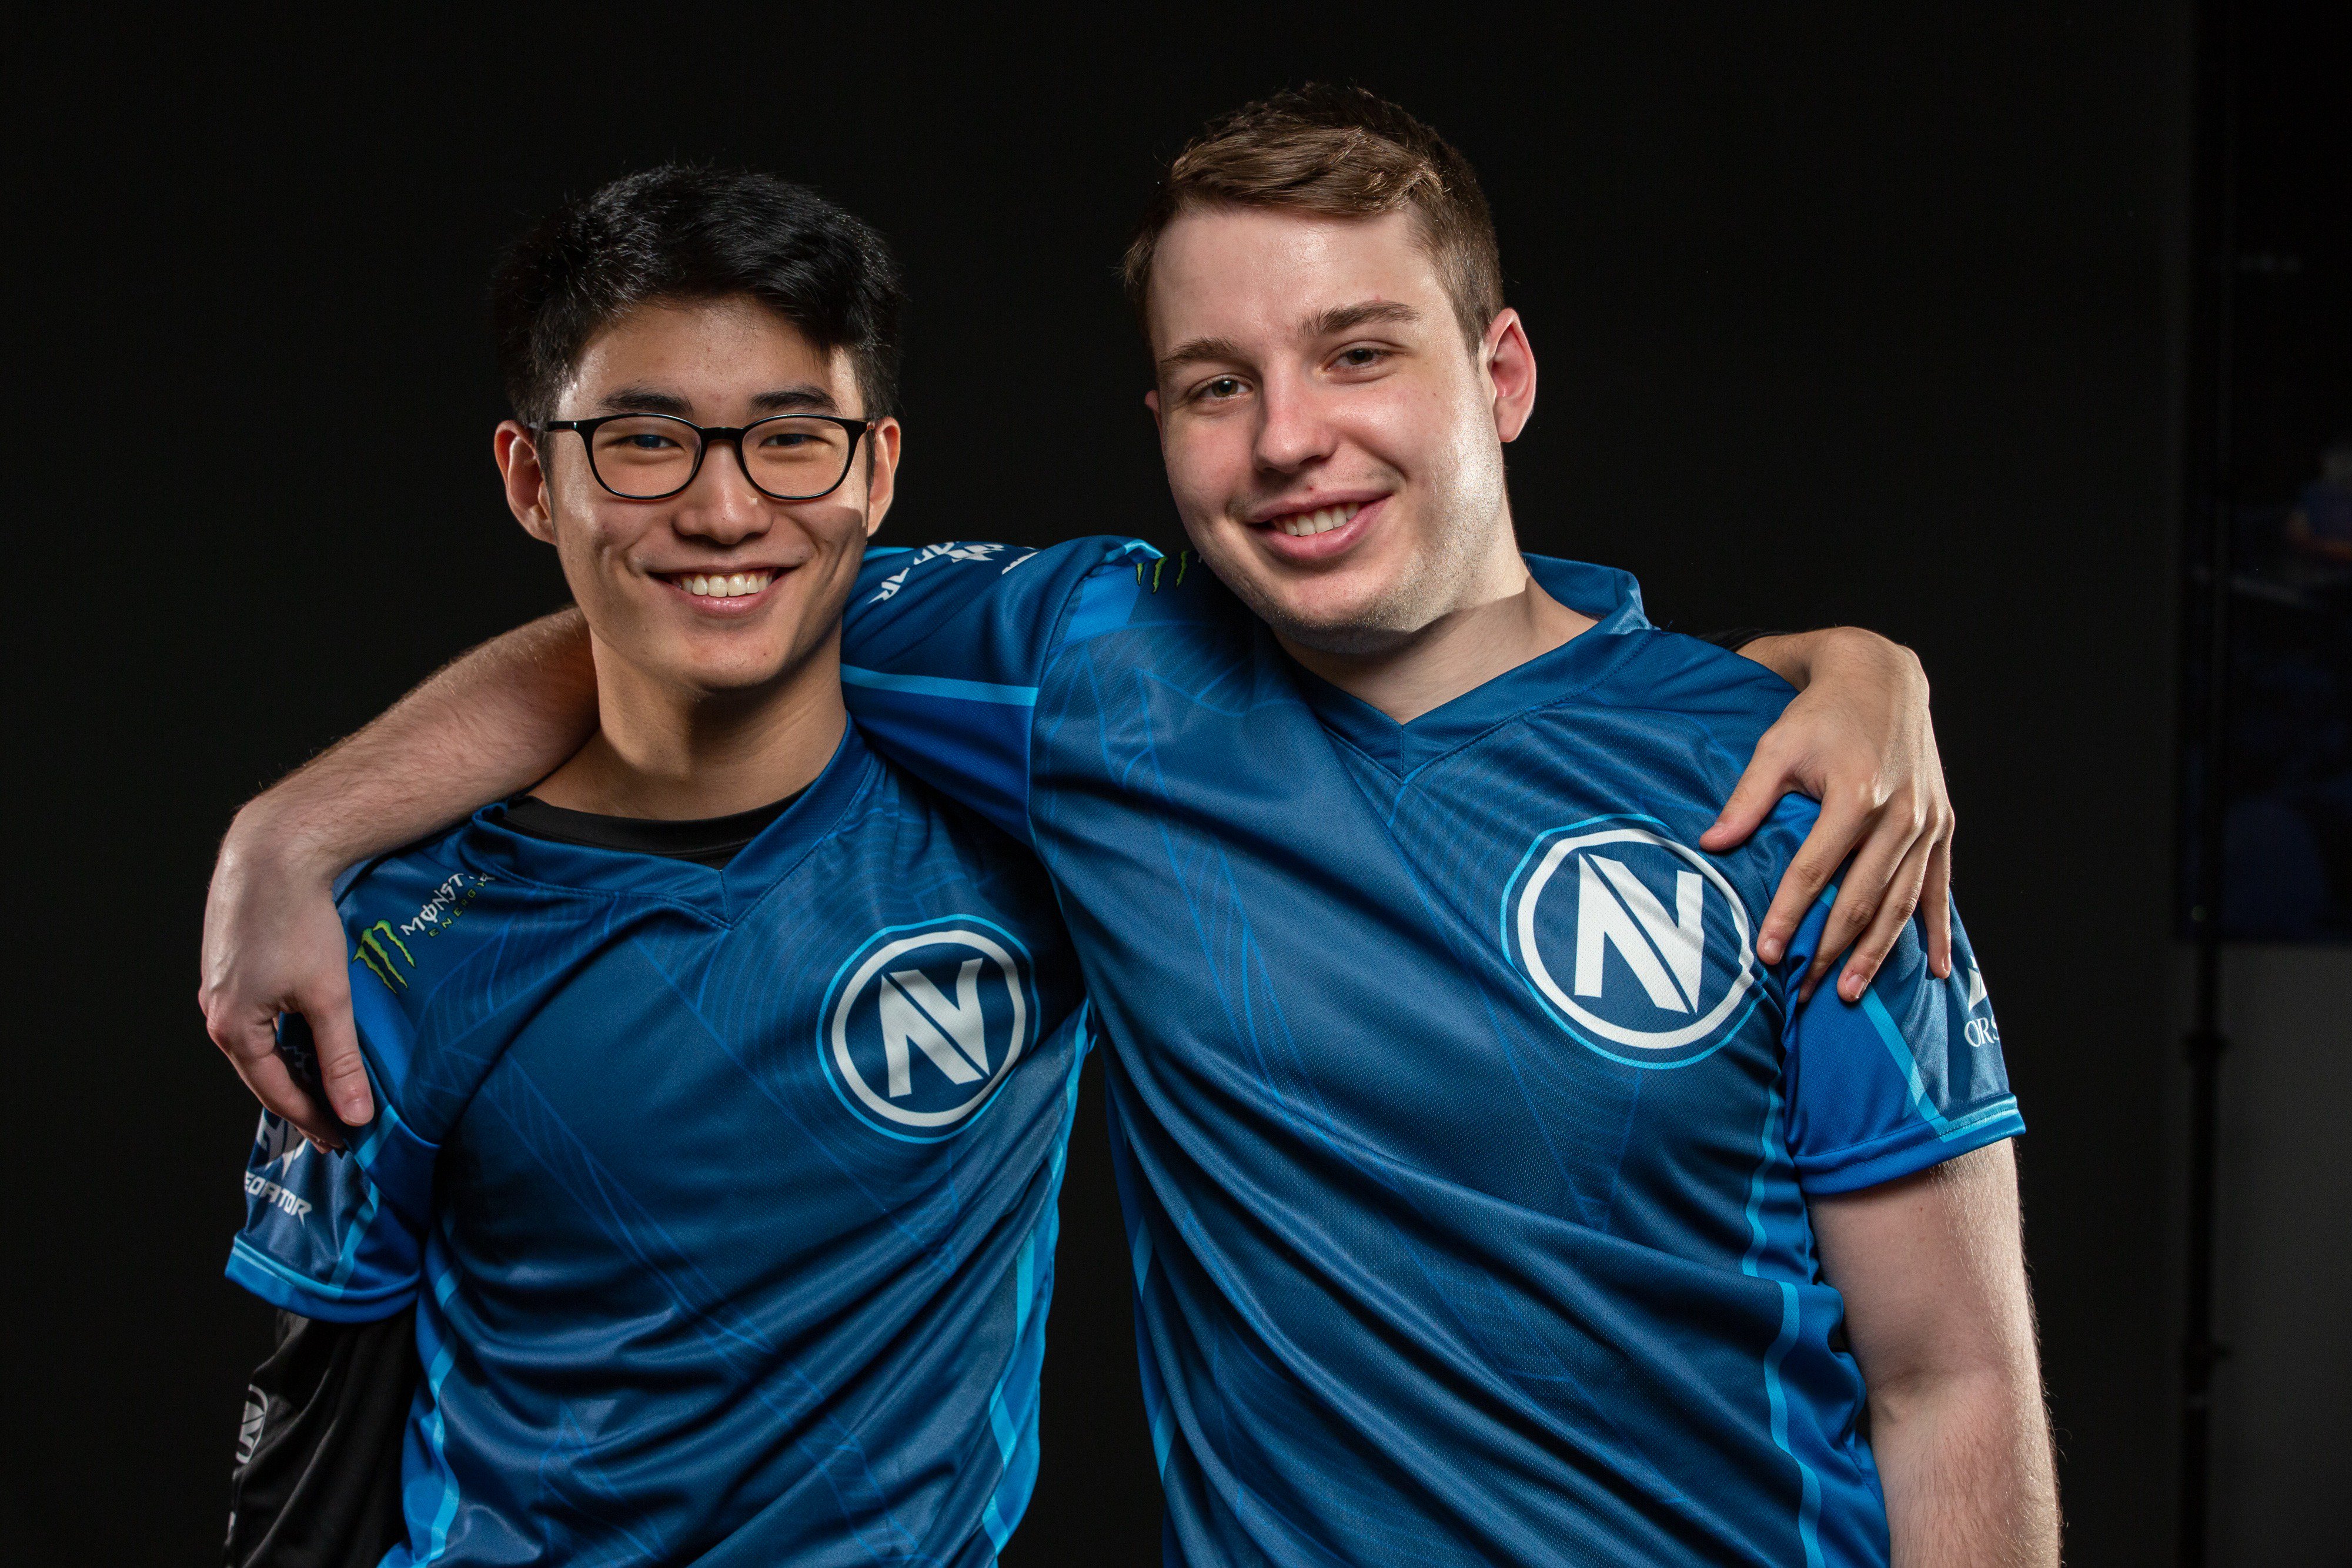 Though together for a relatively short time, Team Envy has quickly bonded thanks to their "chill personalities."